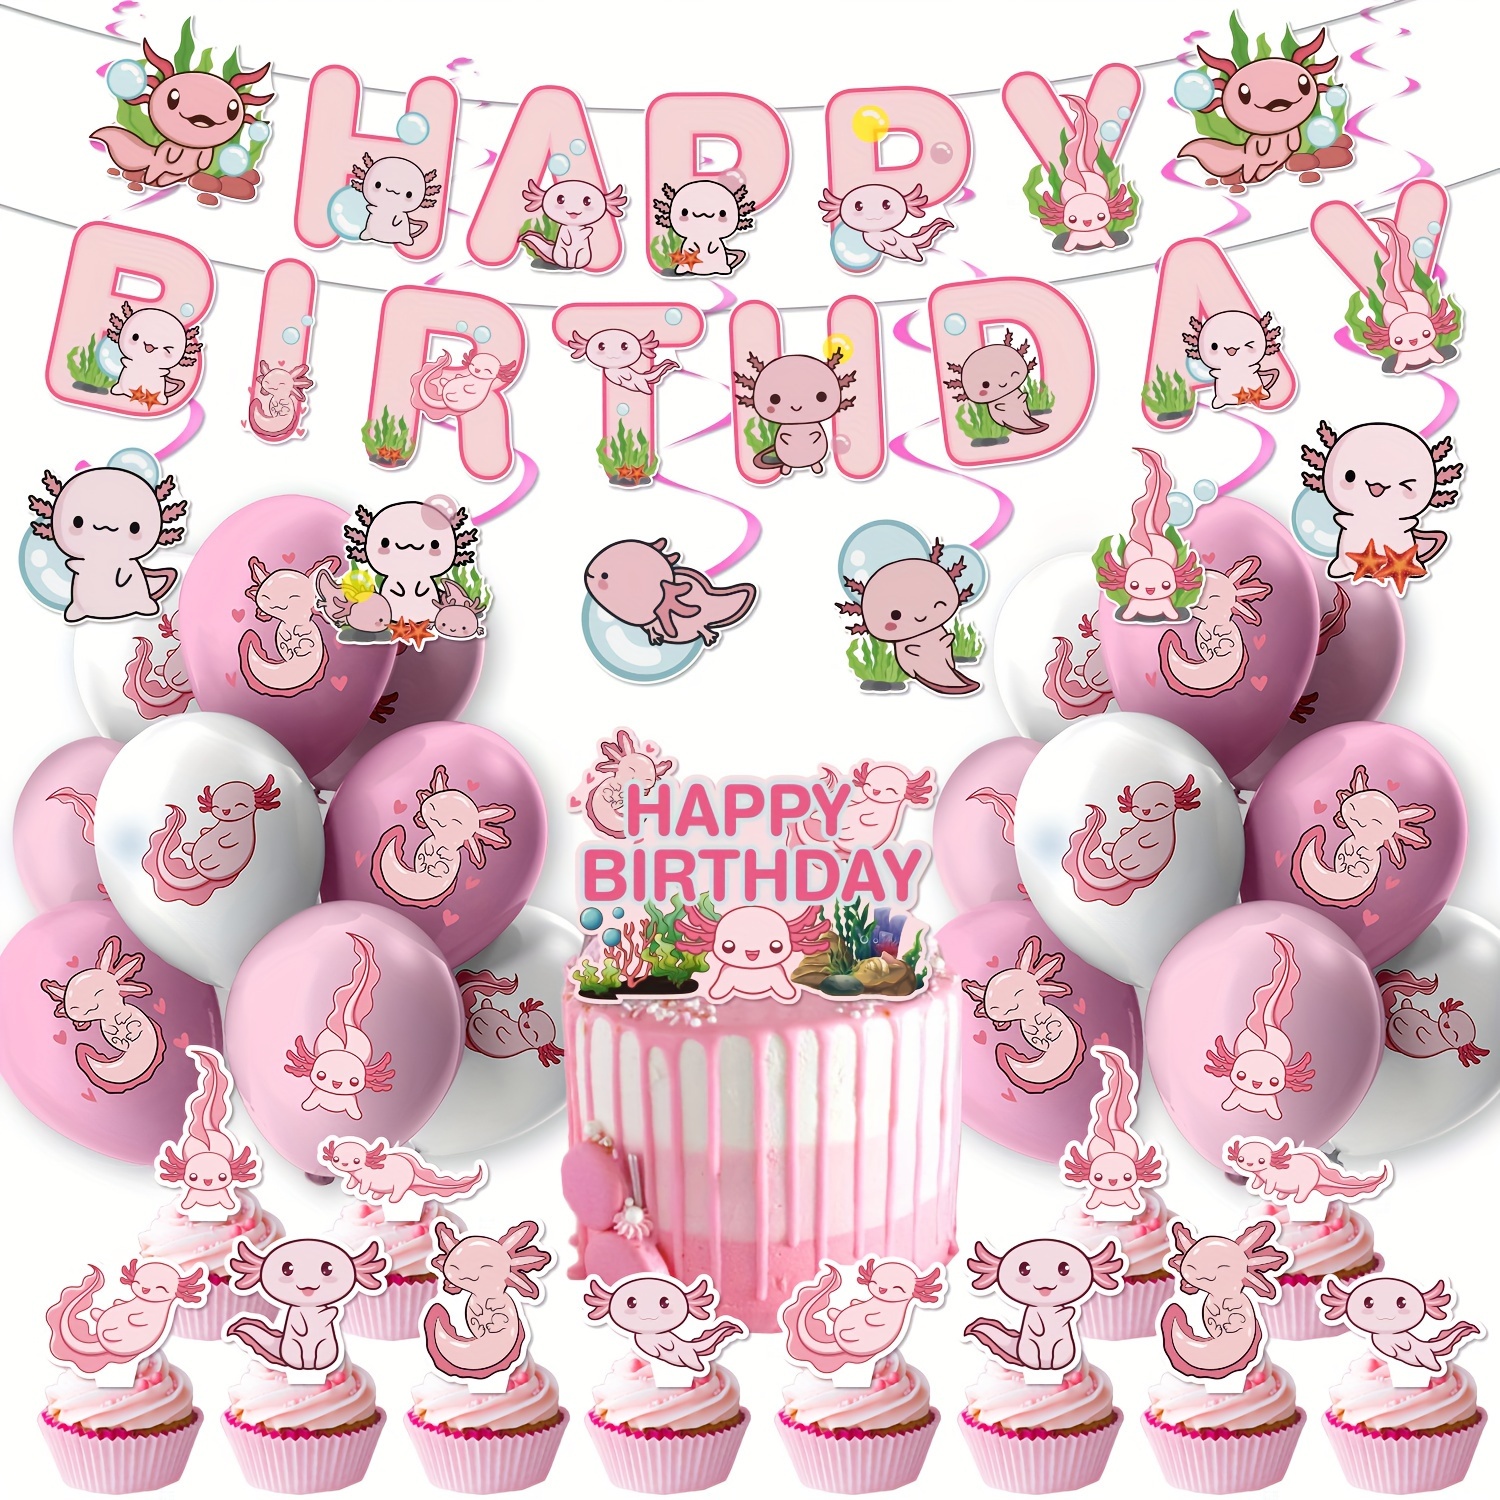 

Axolotl-themed Birthday Party Pack - 50pc Set With Balloons, Happy Birthday Banner & Cake Topper For Axolotl Fans, Perfect For Teens & Adults